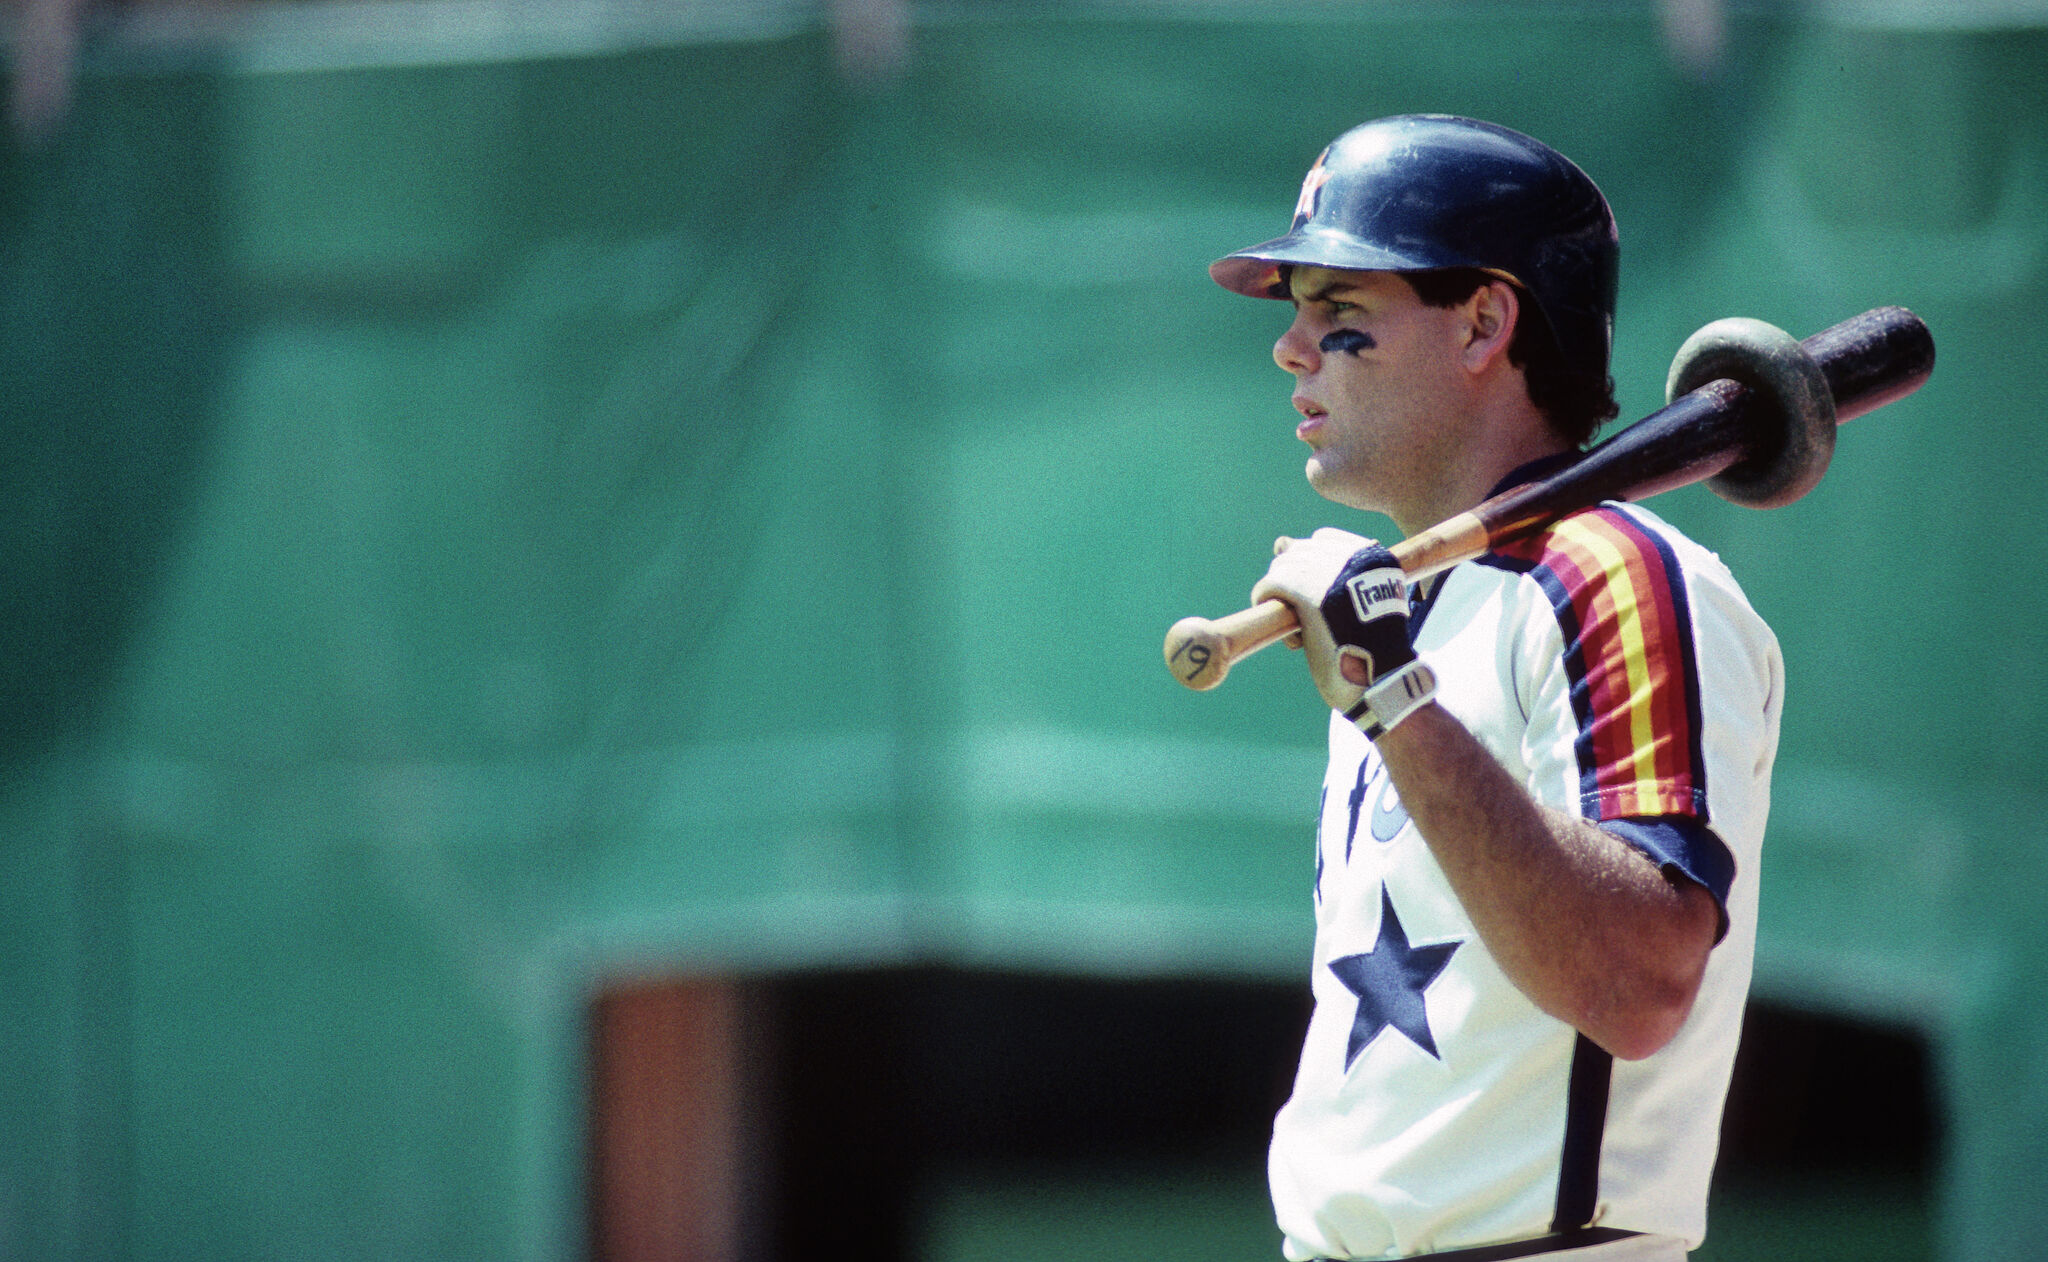 The untimely death of Padres third baseman Ken Caminiti/ EVT